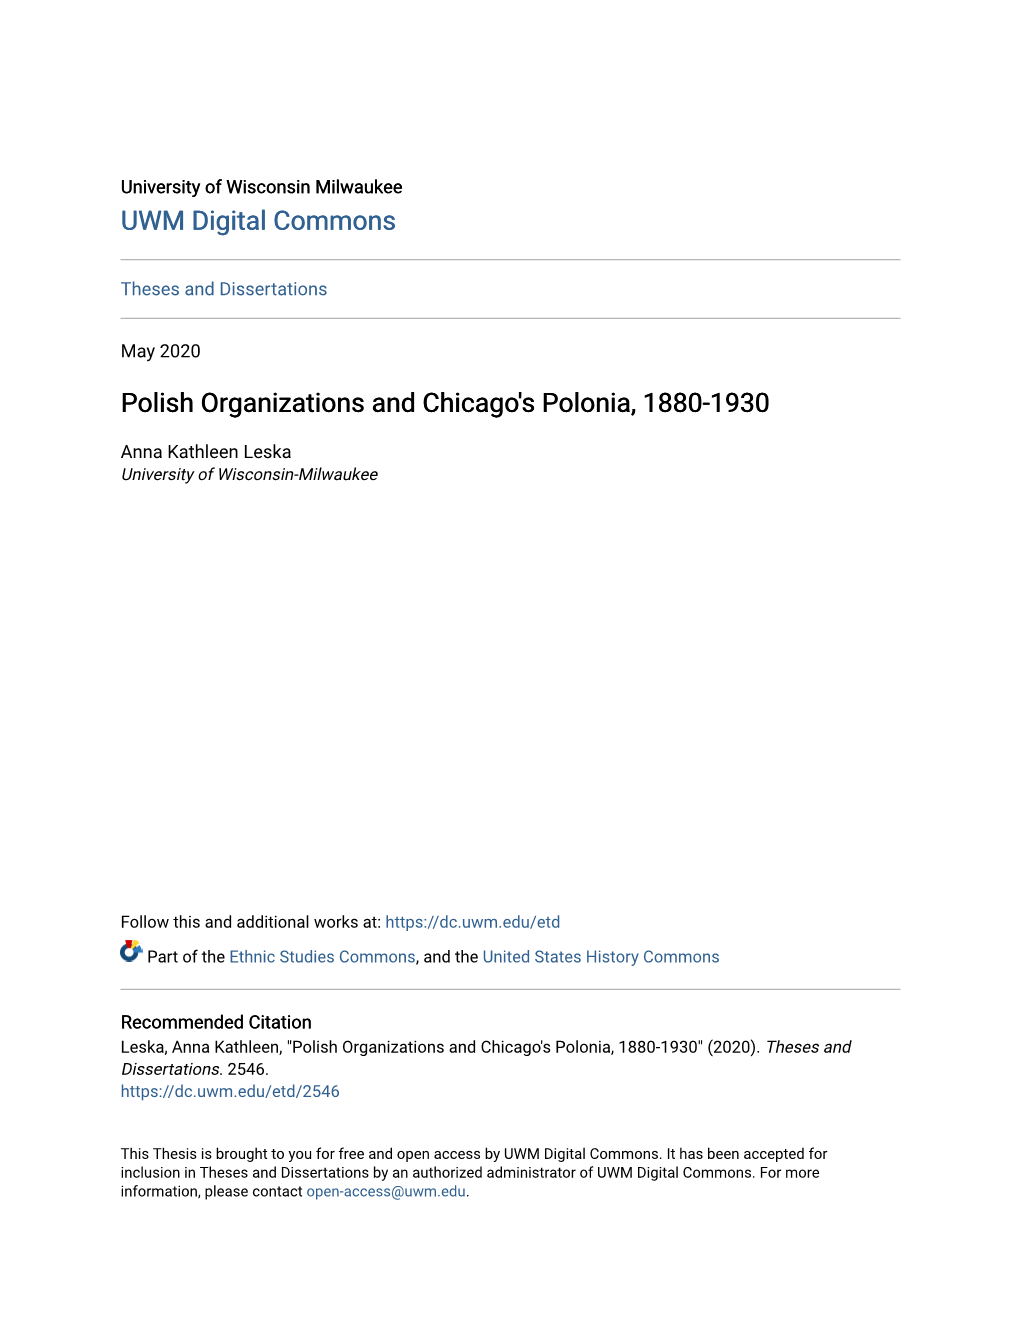 Polish Organizations and Chicago's Polonia, 1880-1930